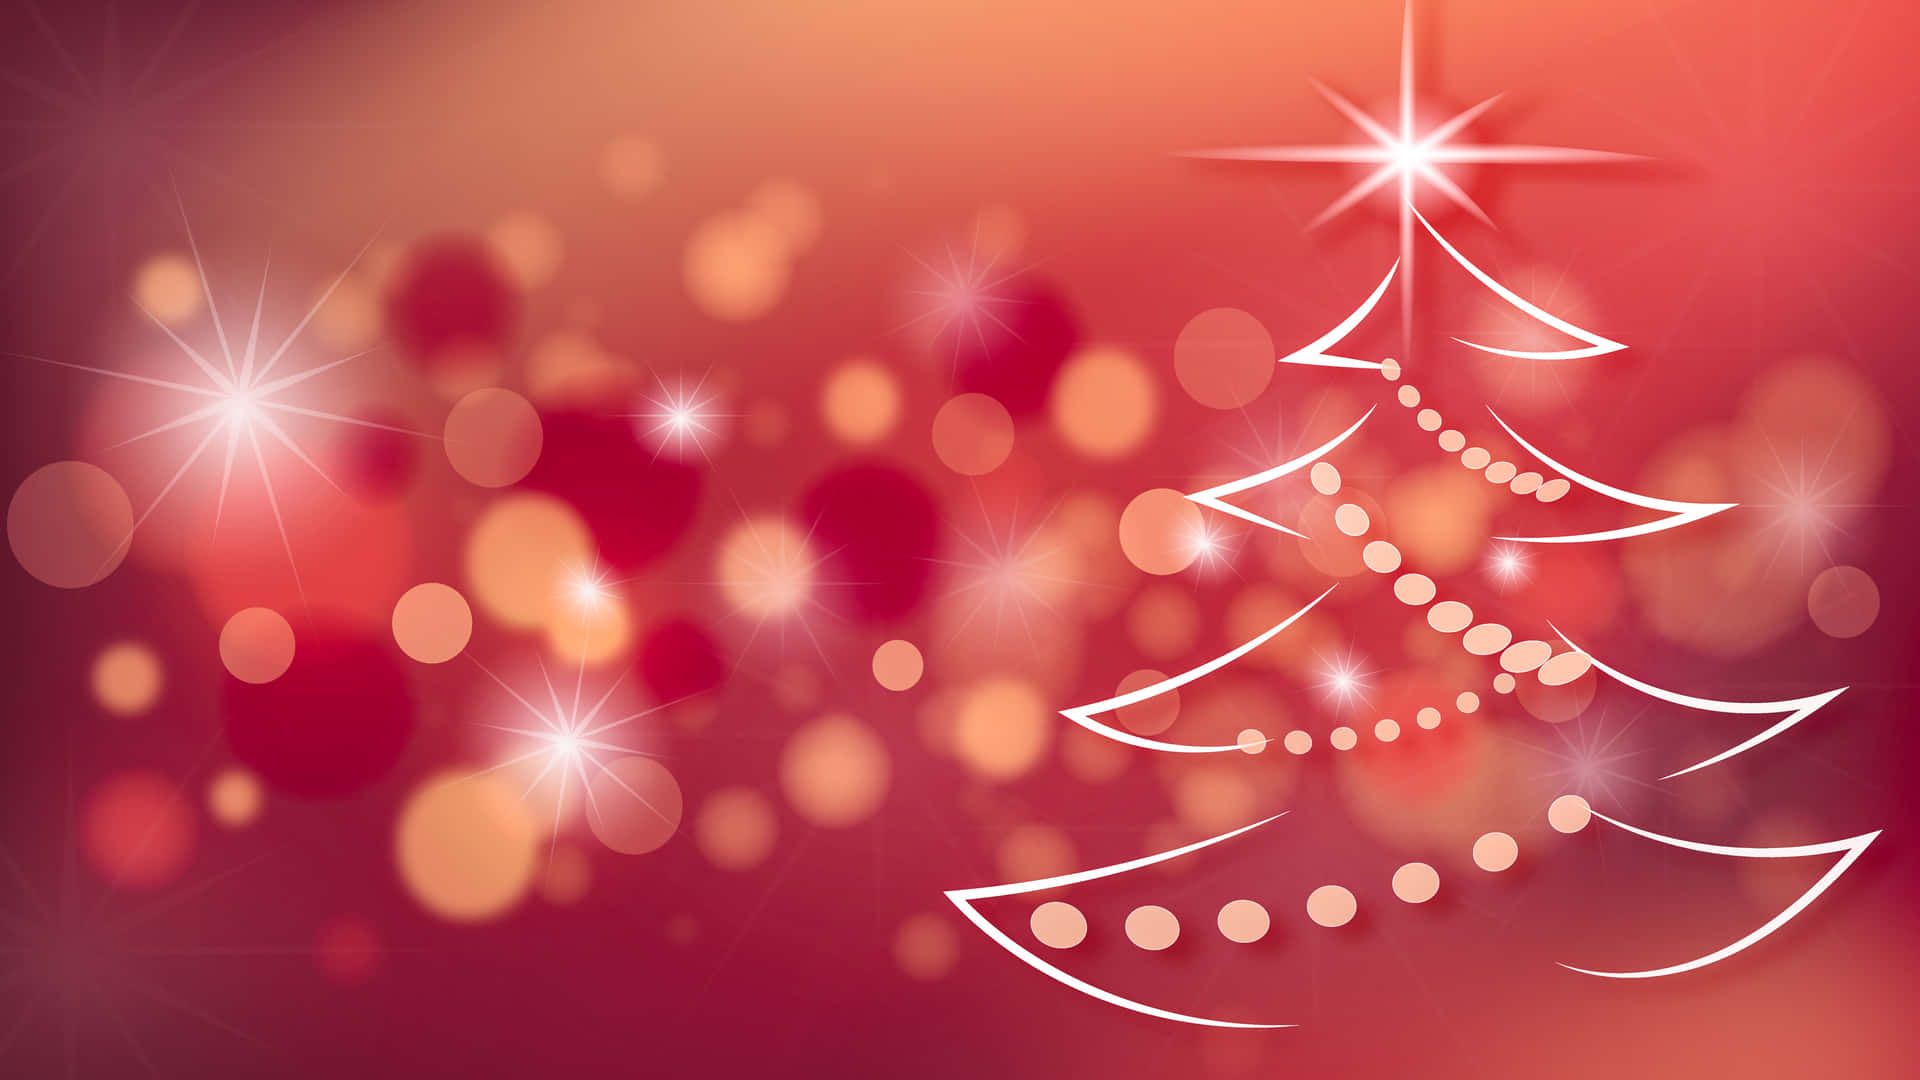 Celebrate the holiday season in style with this vibrant Christmas Red Background!